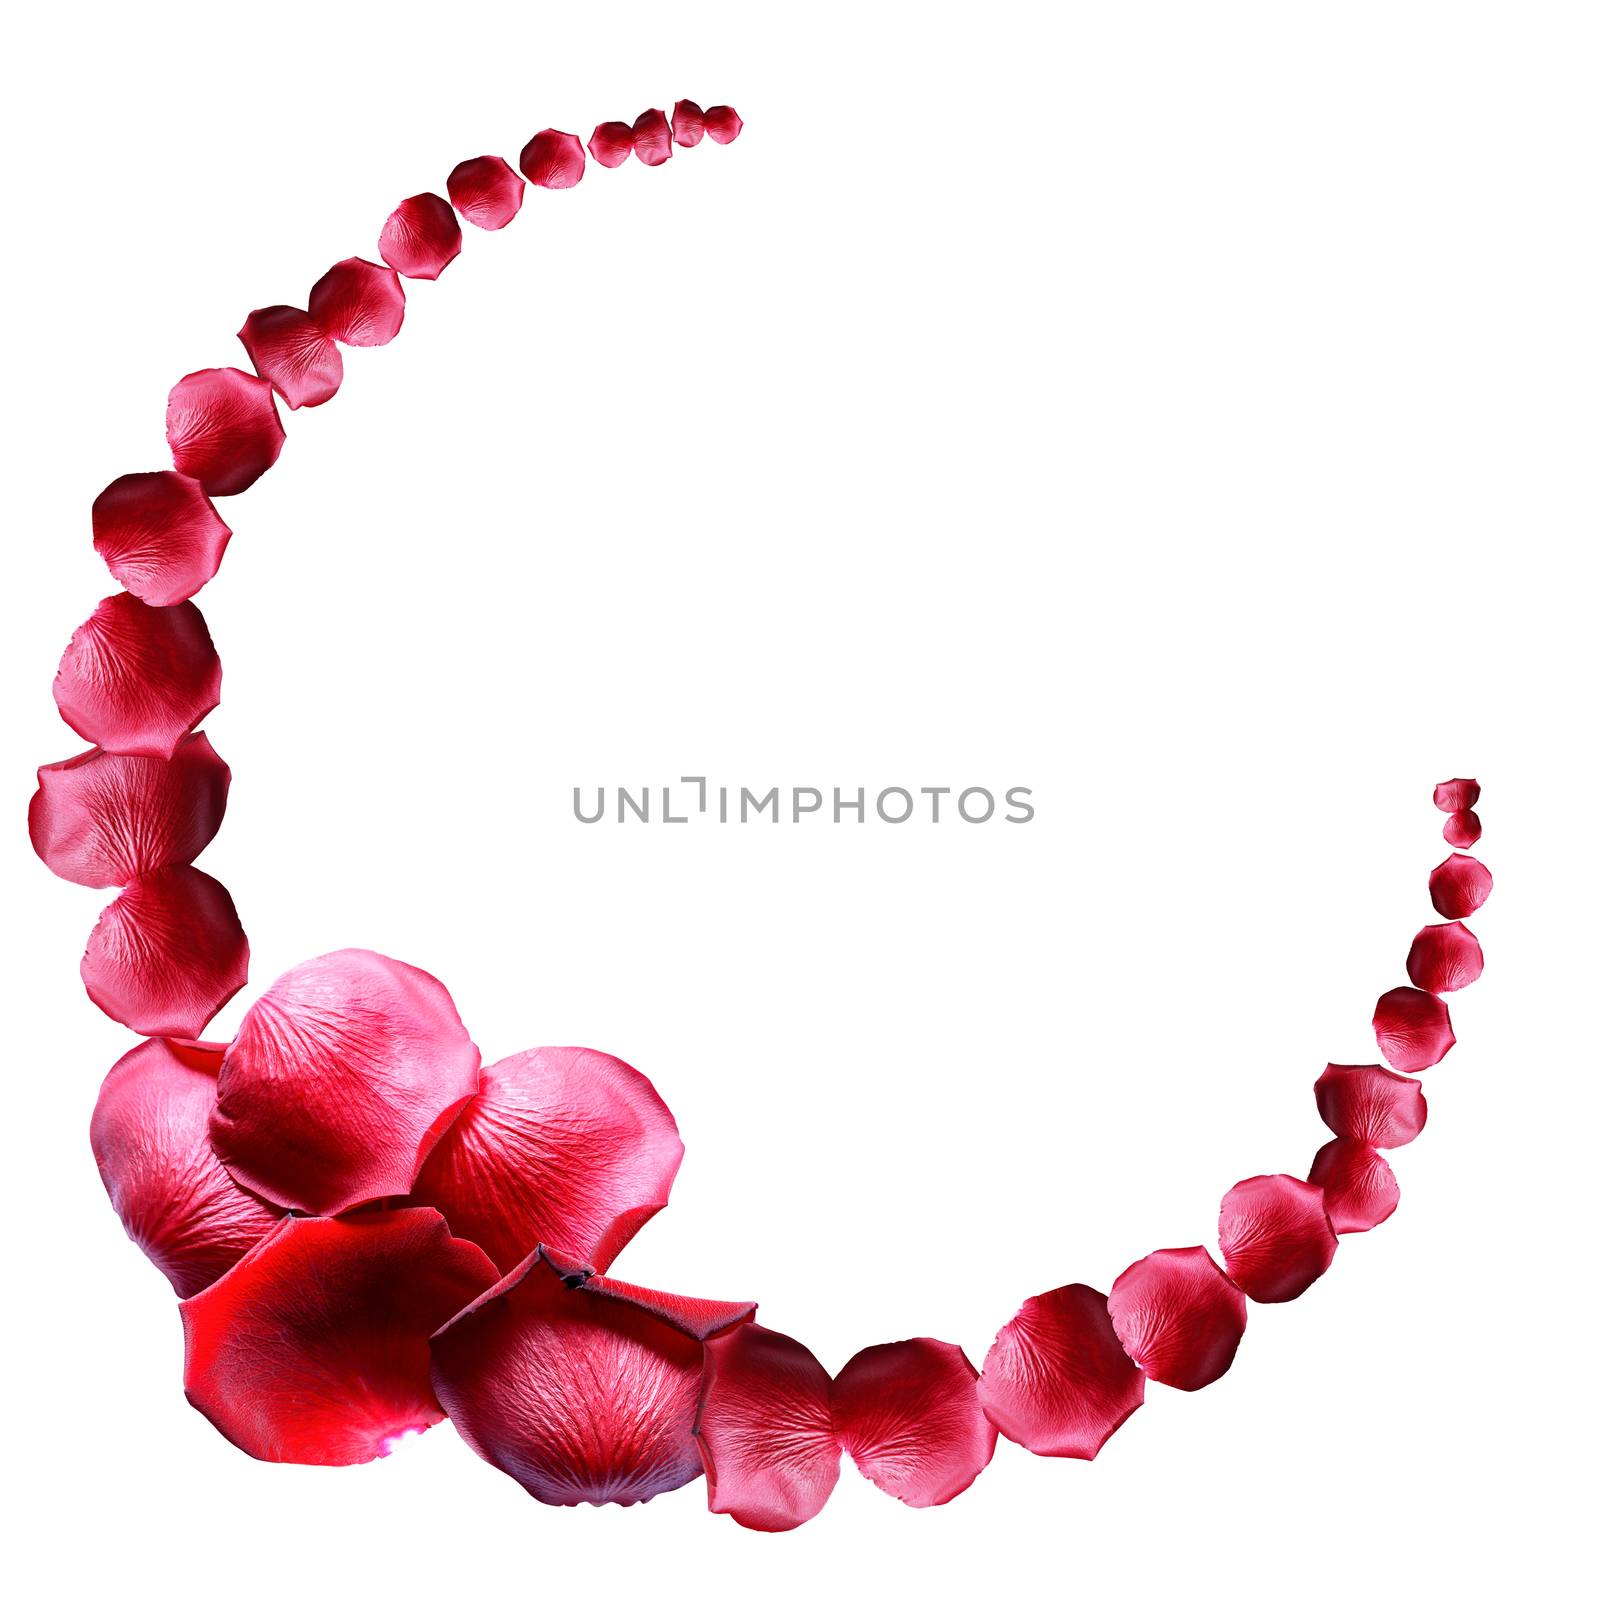 Nice border made from red rose petals on white background